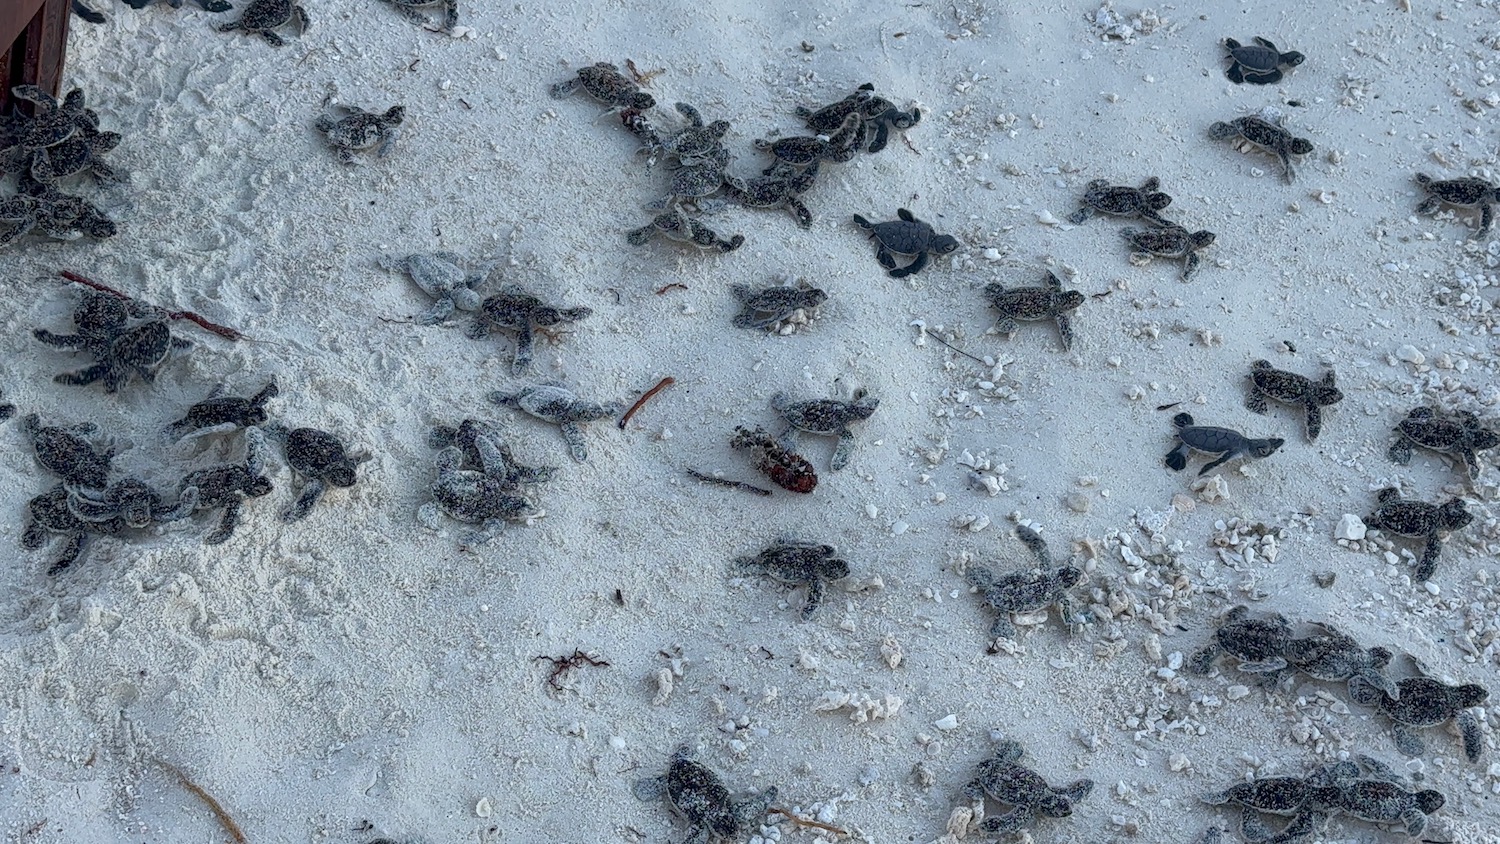 a group of baby turtles on the sand